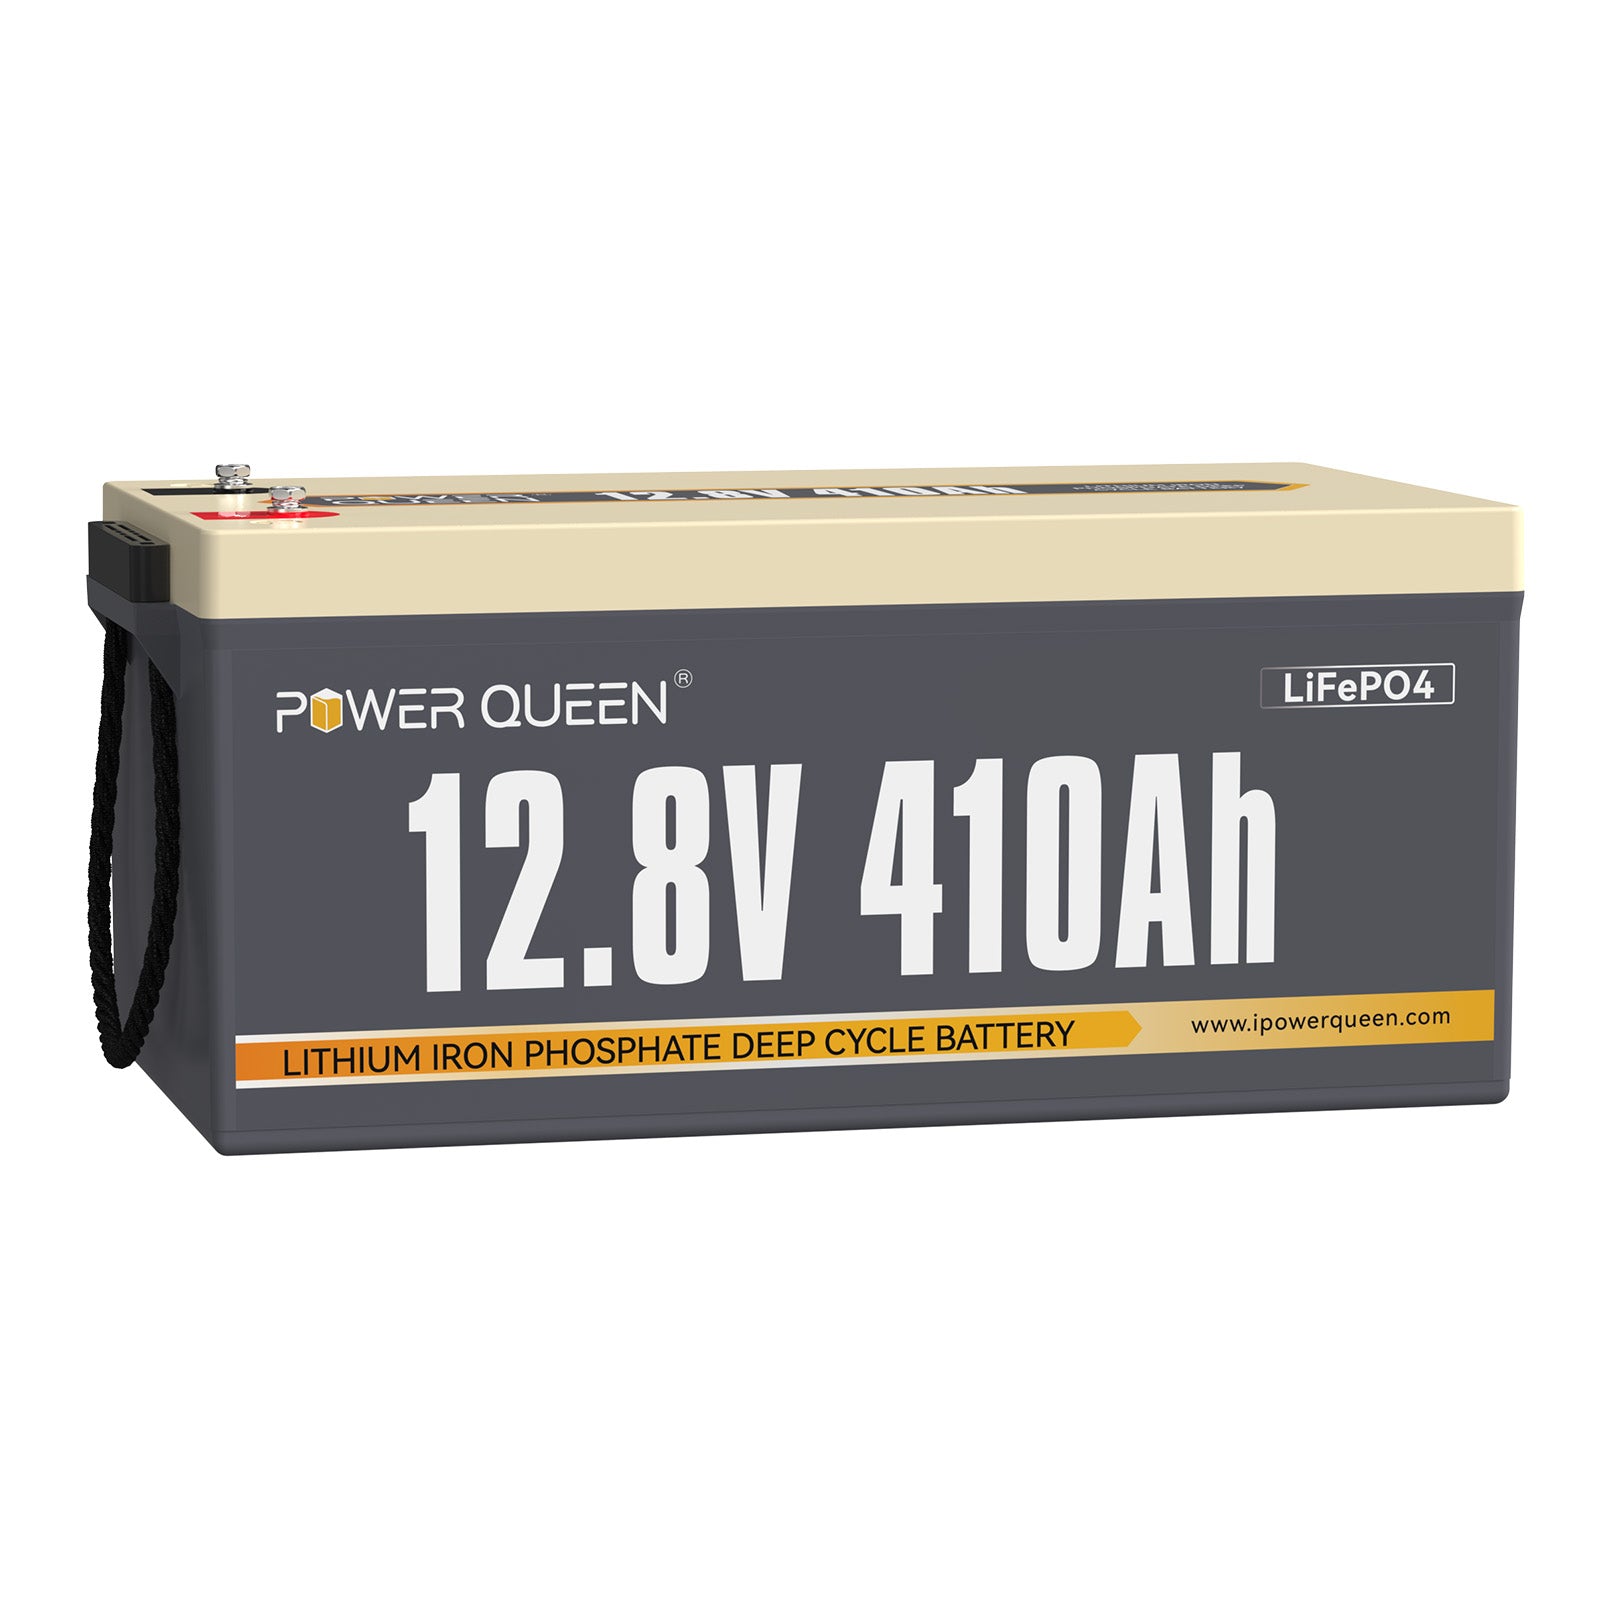 Power Queen 12.8V 410Ah LiFePO4 battery, built-in 250A BMS